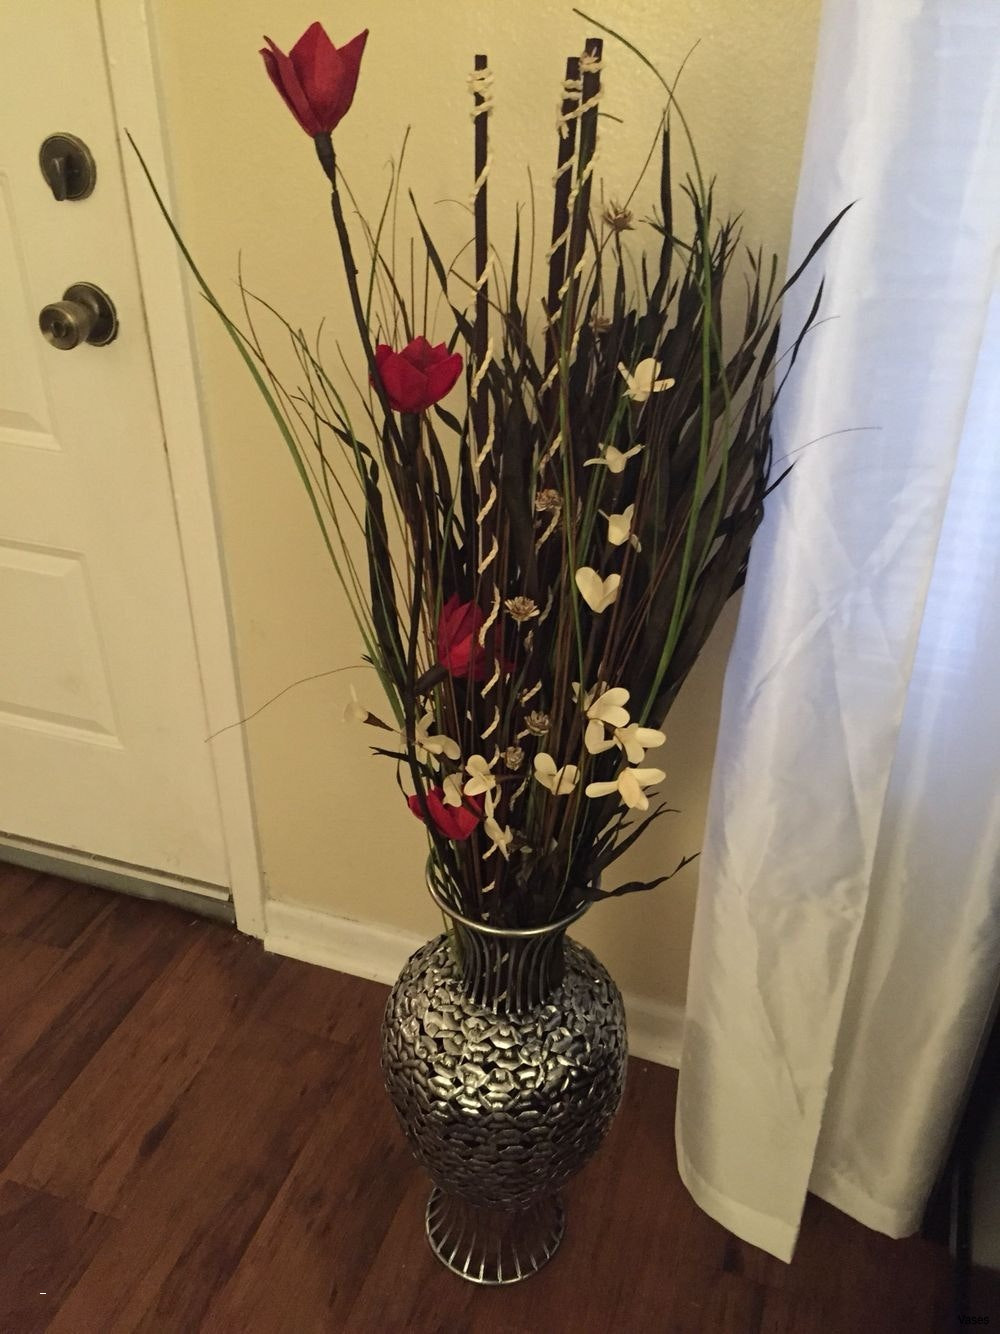 25 Fashionable Silver Floral Vase 2024 free download silver floral vase of stick lights new vases vase with sticks red in a i 0d 3d model and with stick lights new vases vase with sticks red in a i 0d 3d model and lights ice